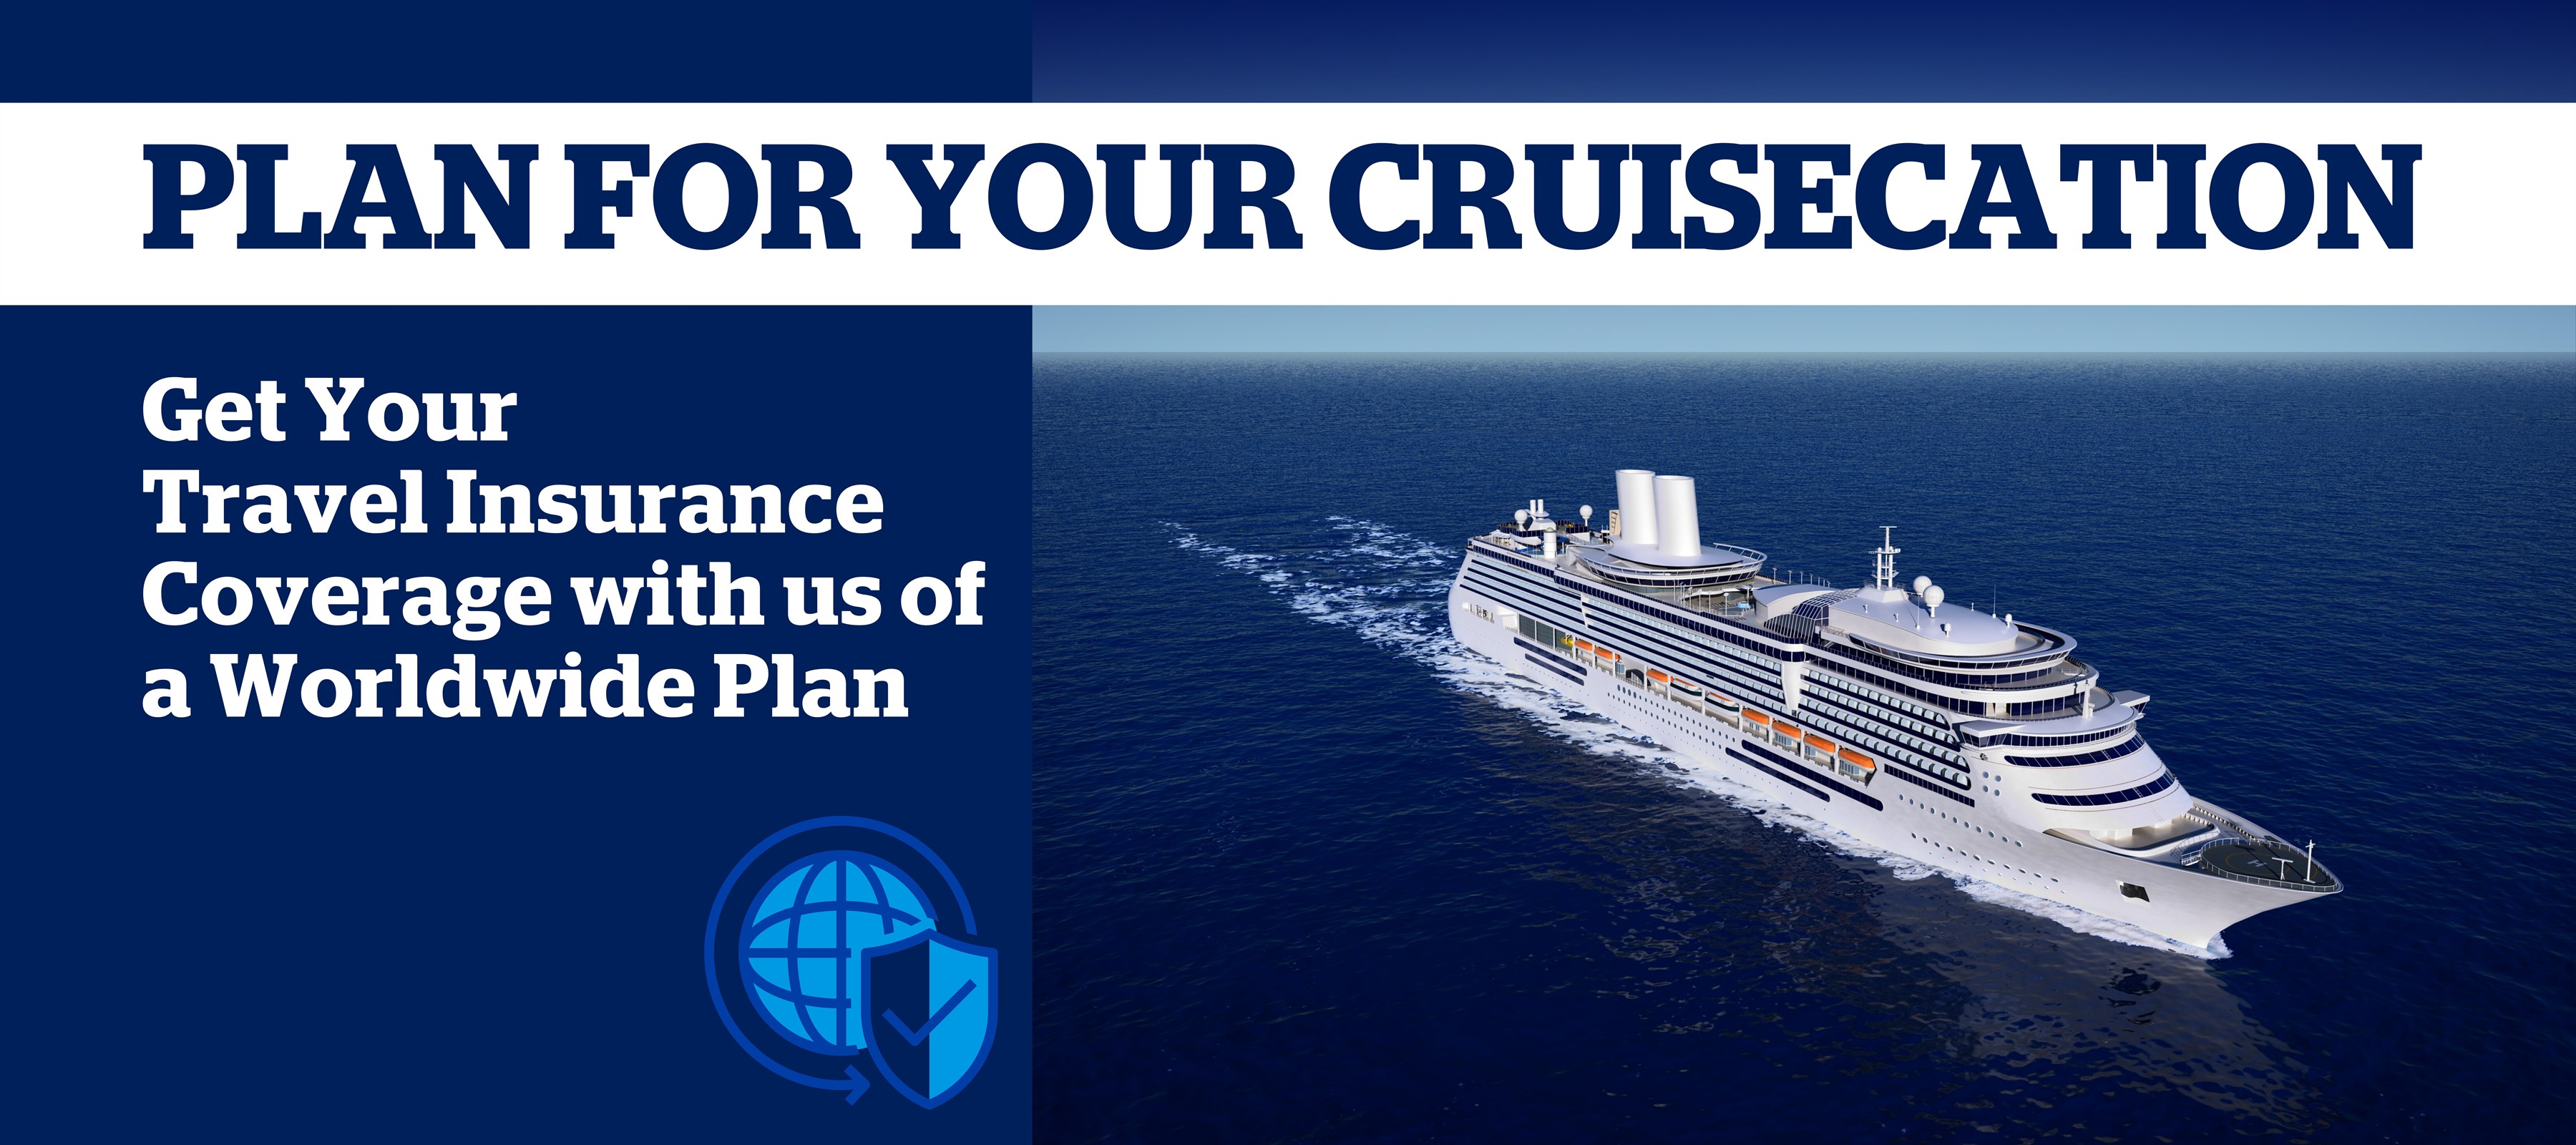 Plan for your cruisecation